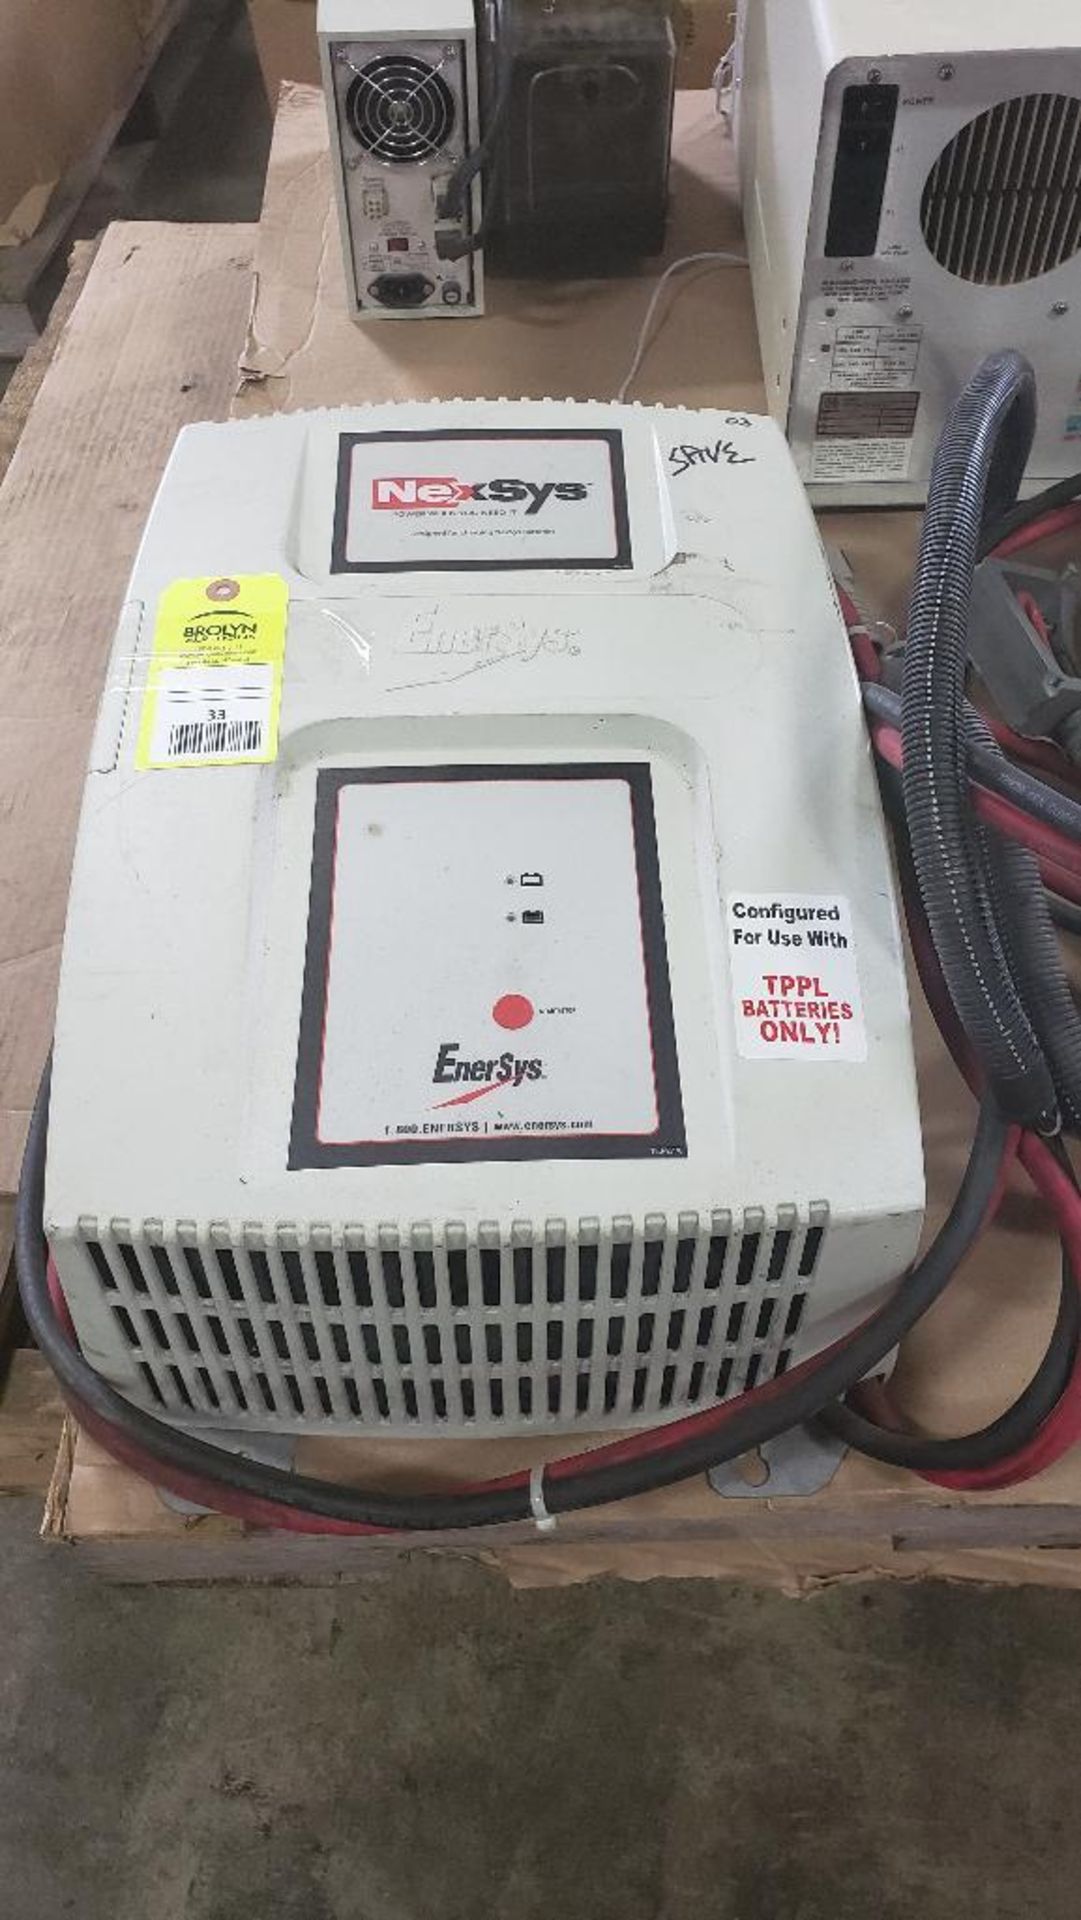 EnerSys NexSys 24v battery charger. 875aH, 12 cell. 480v 3 phase input.